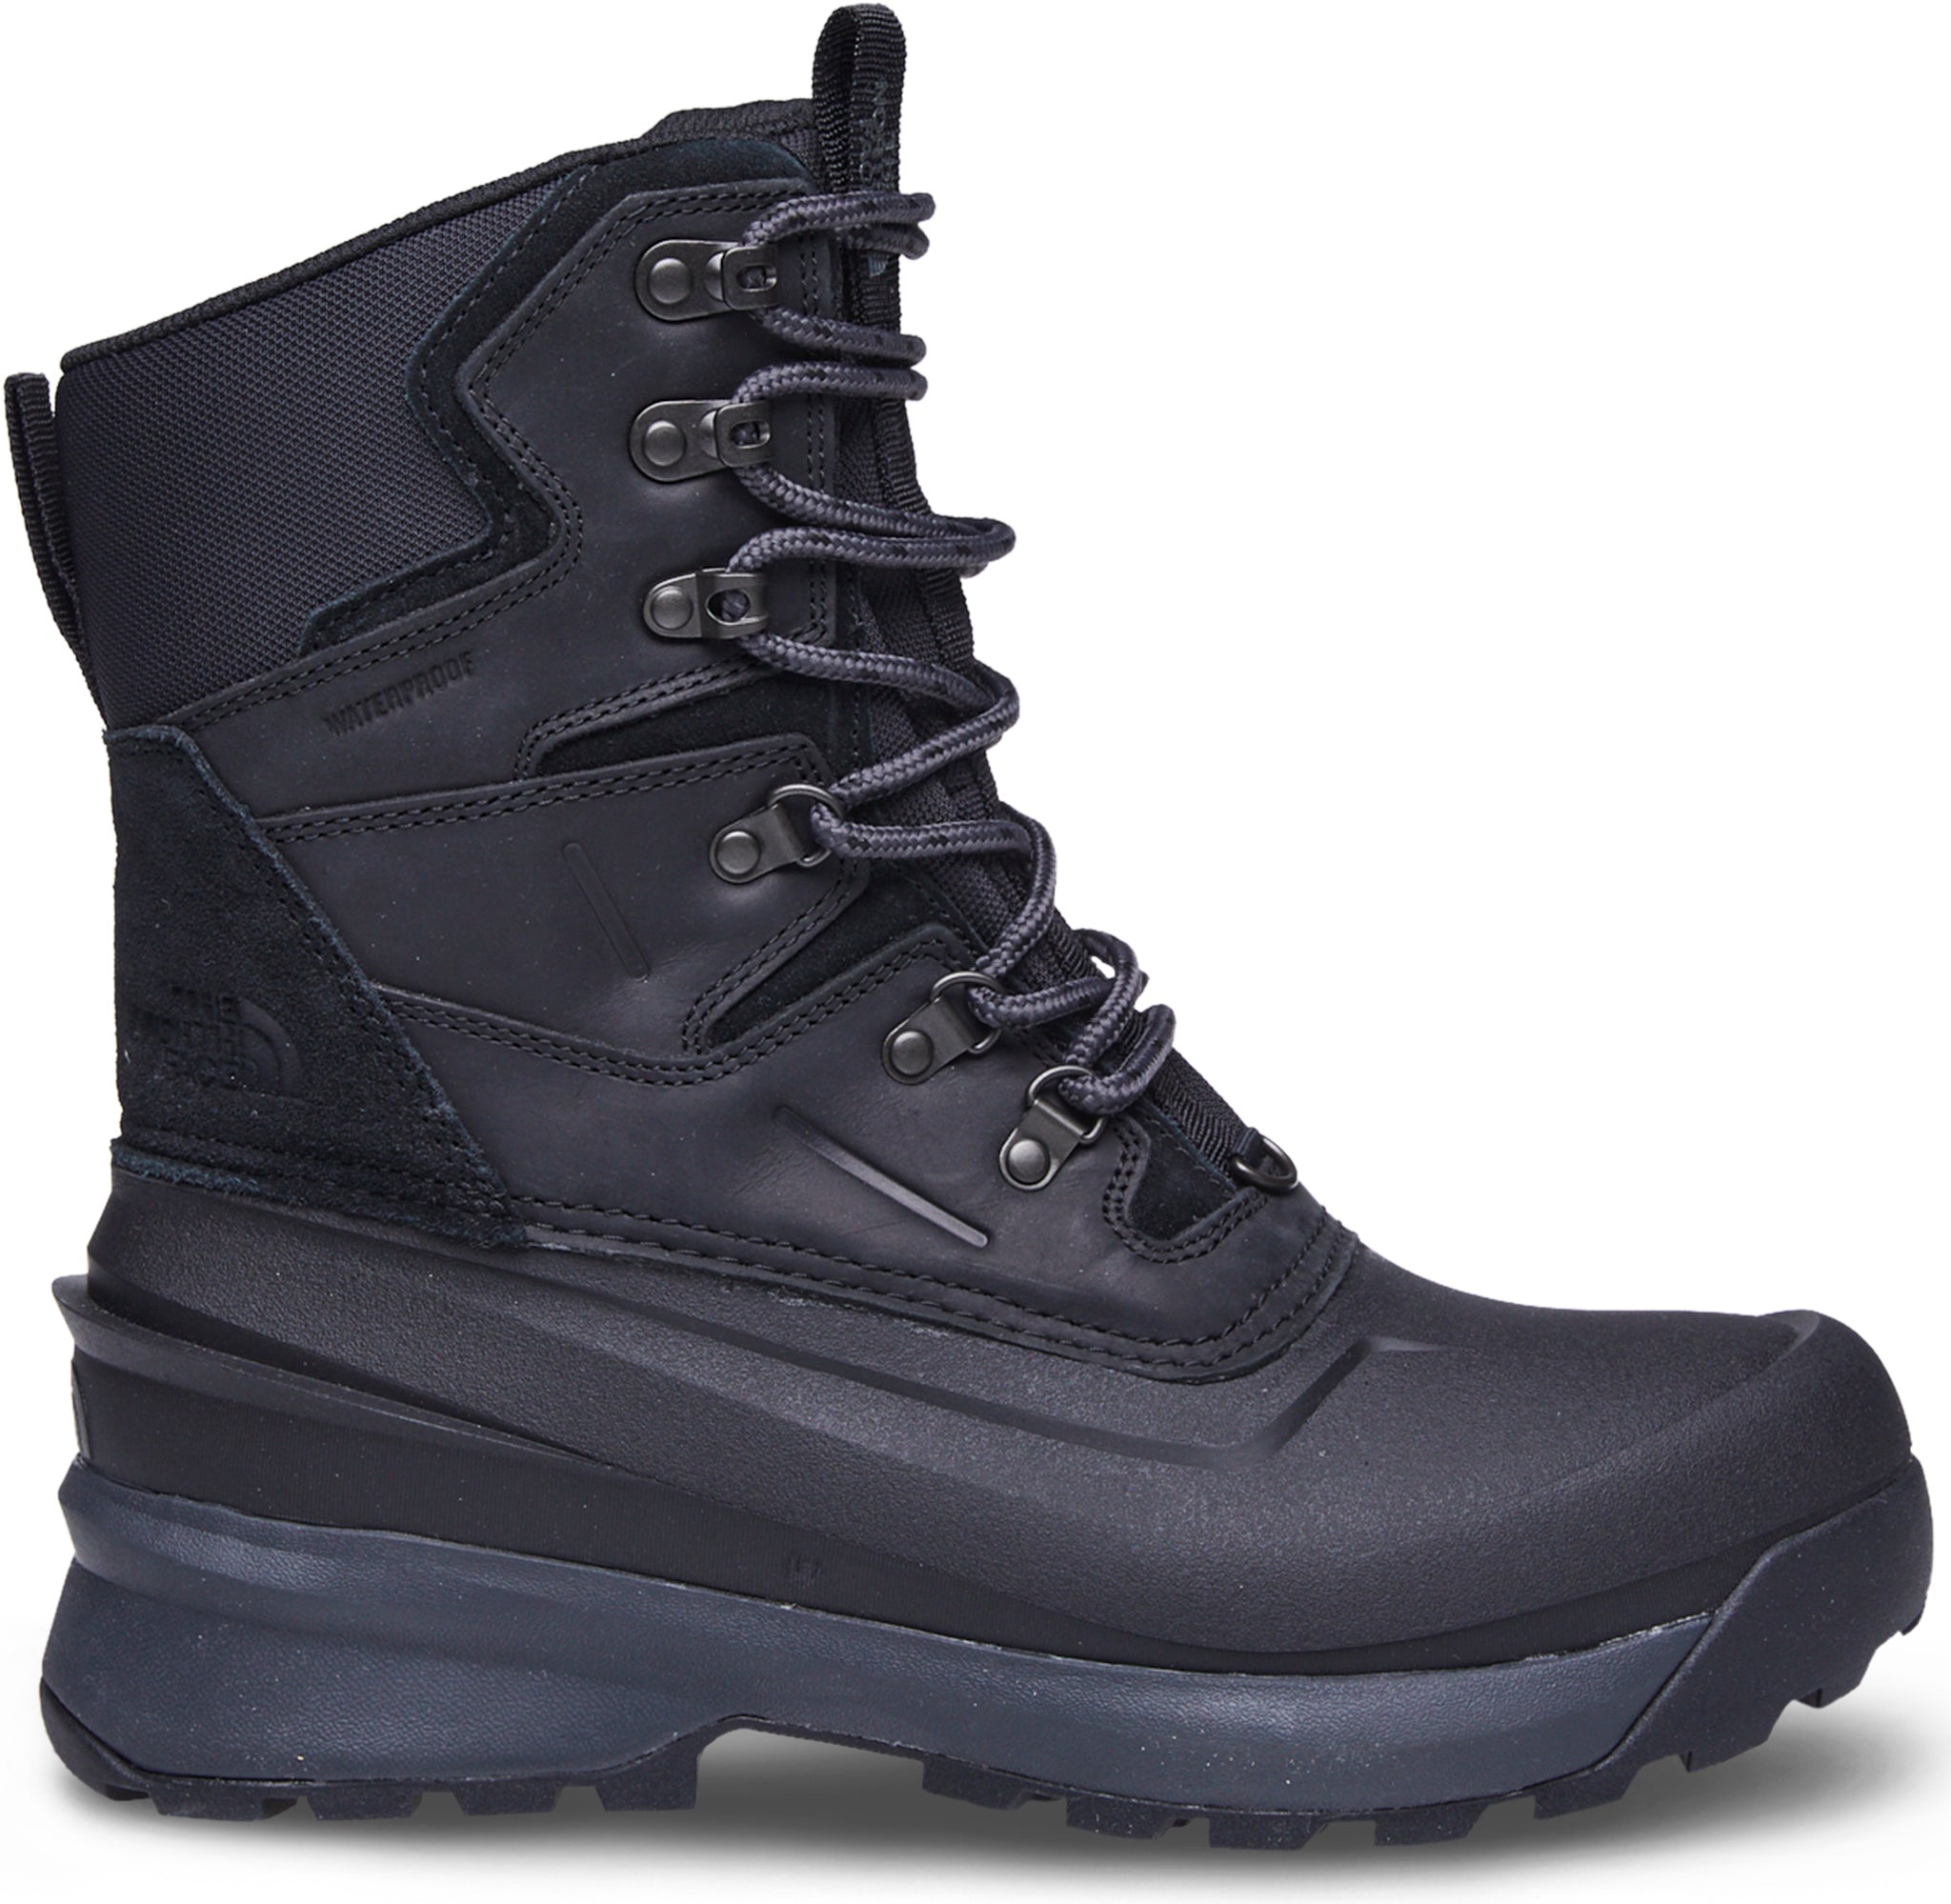 The North Face Chilkat V 400 Waterproof Boots - Men’s | Altitude Sports